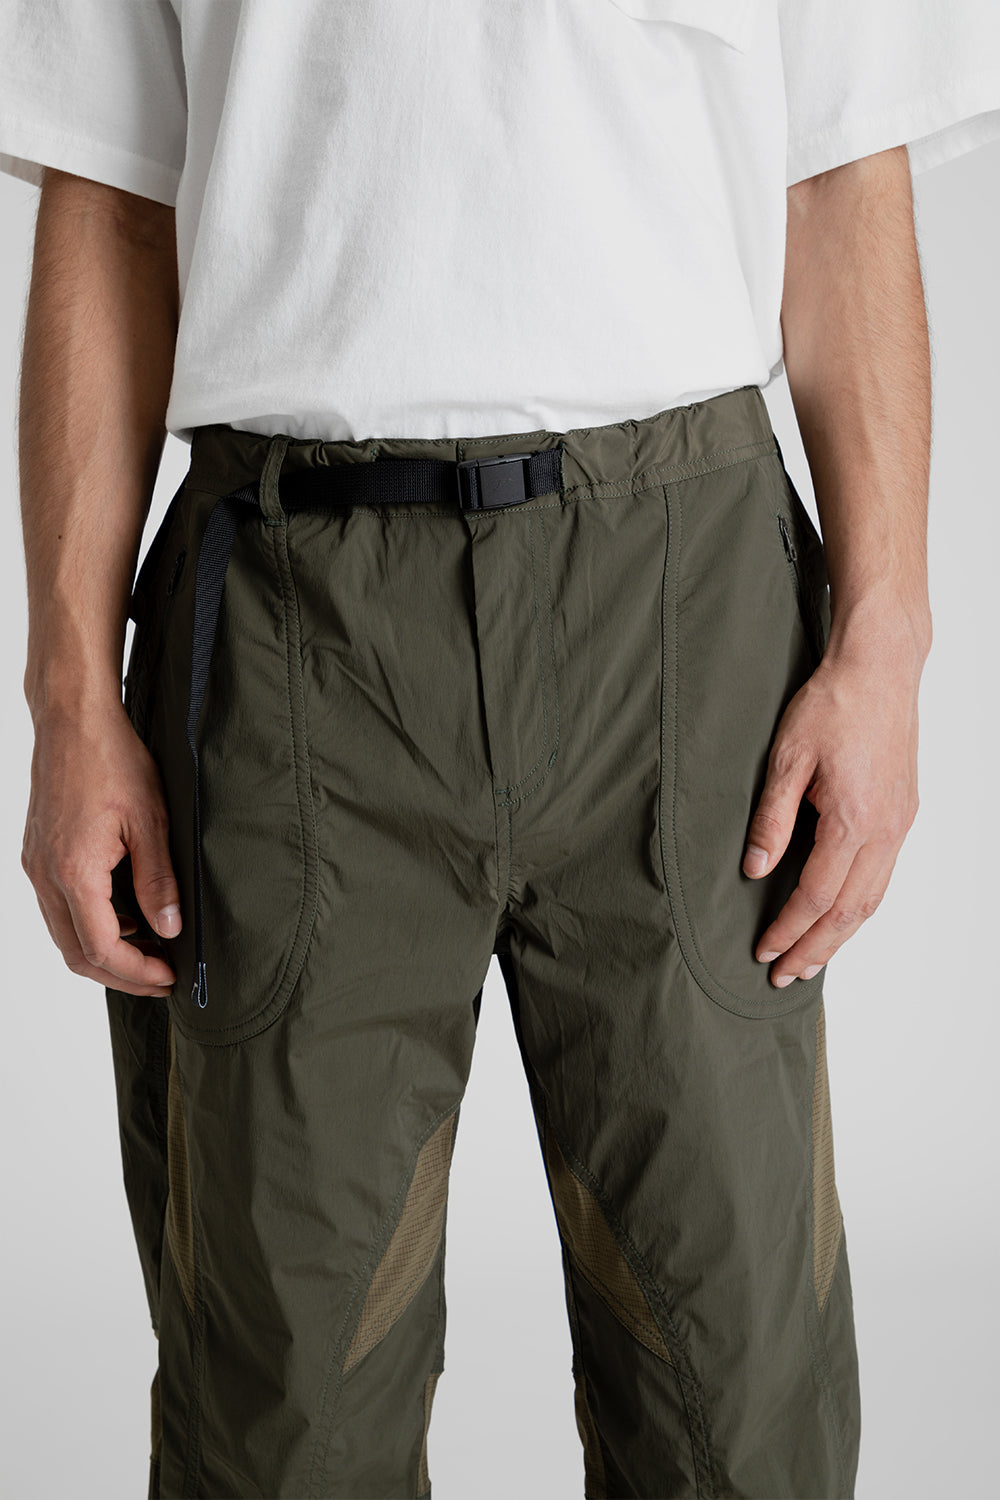 Cayl Breathe Pant in Army Green